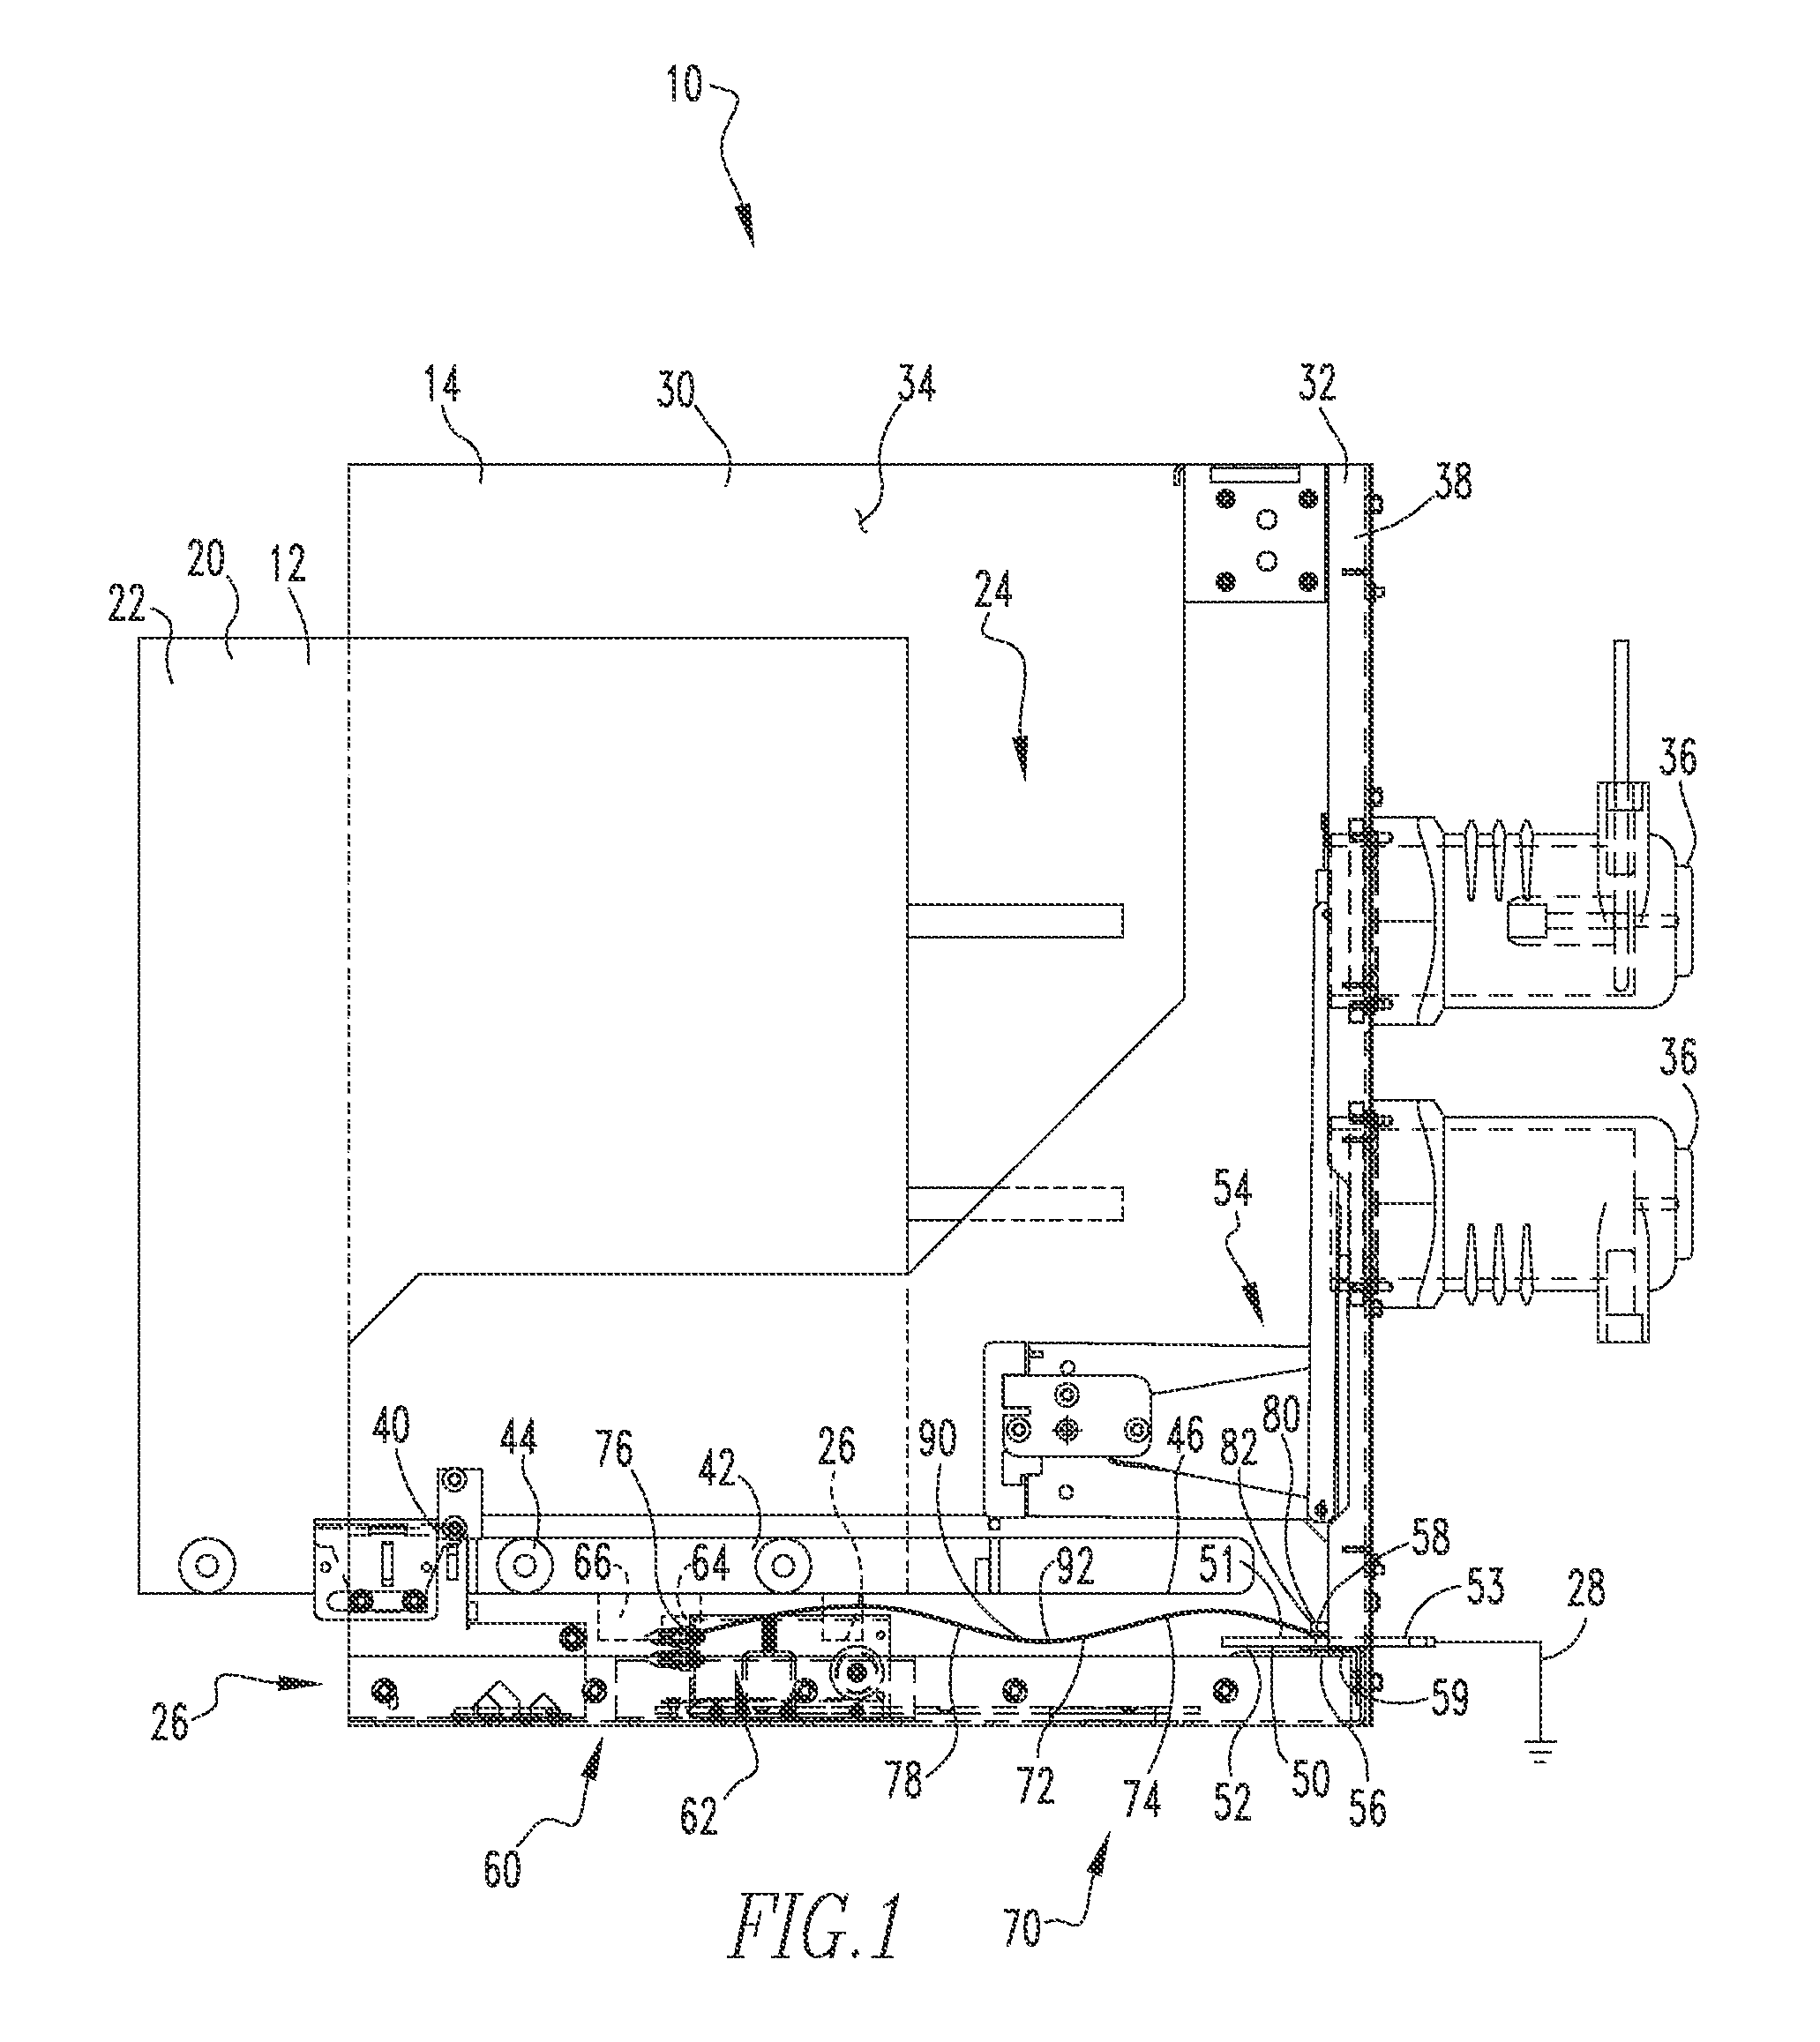 Switchgear enclosure housing assembly including an extendable conductor assembly